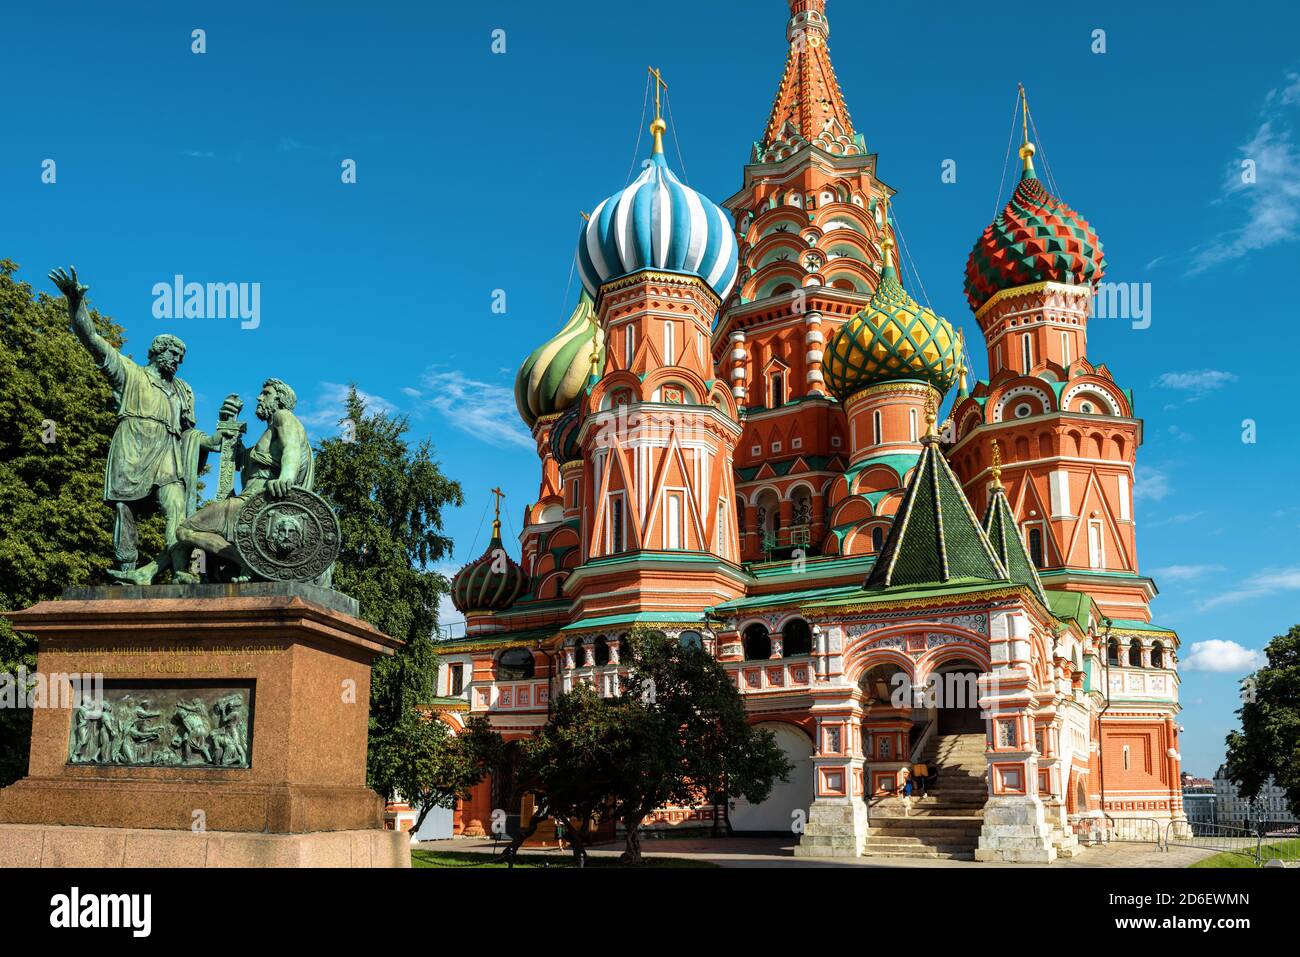 St Basil’s Cathedral on Red Square, Moscow, Russia. Beautiful Saint Basil’s church or Temple of Vasily the Blessed is famous landmark of Moscow. Old h Stock Photo